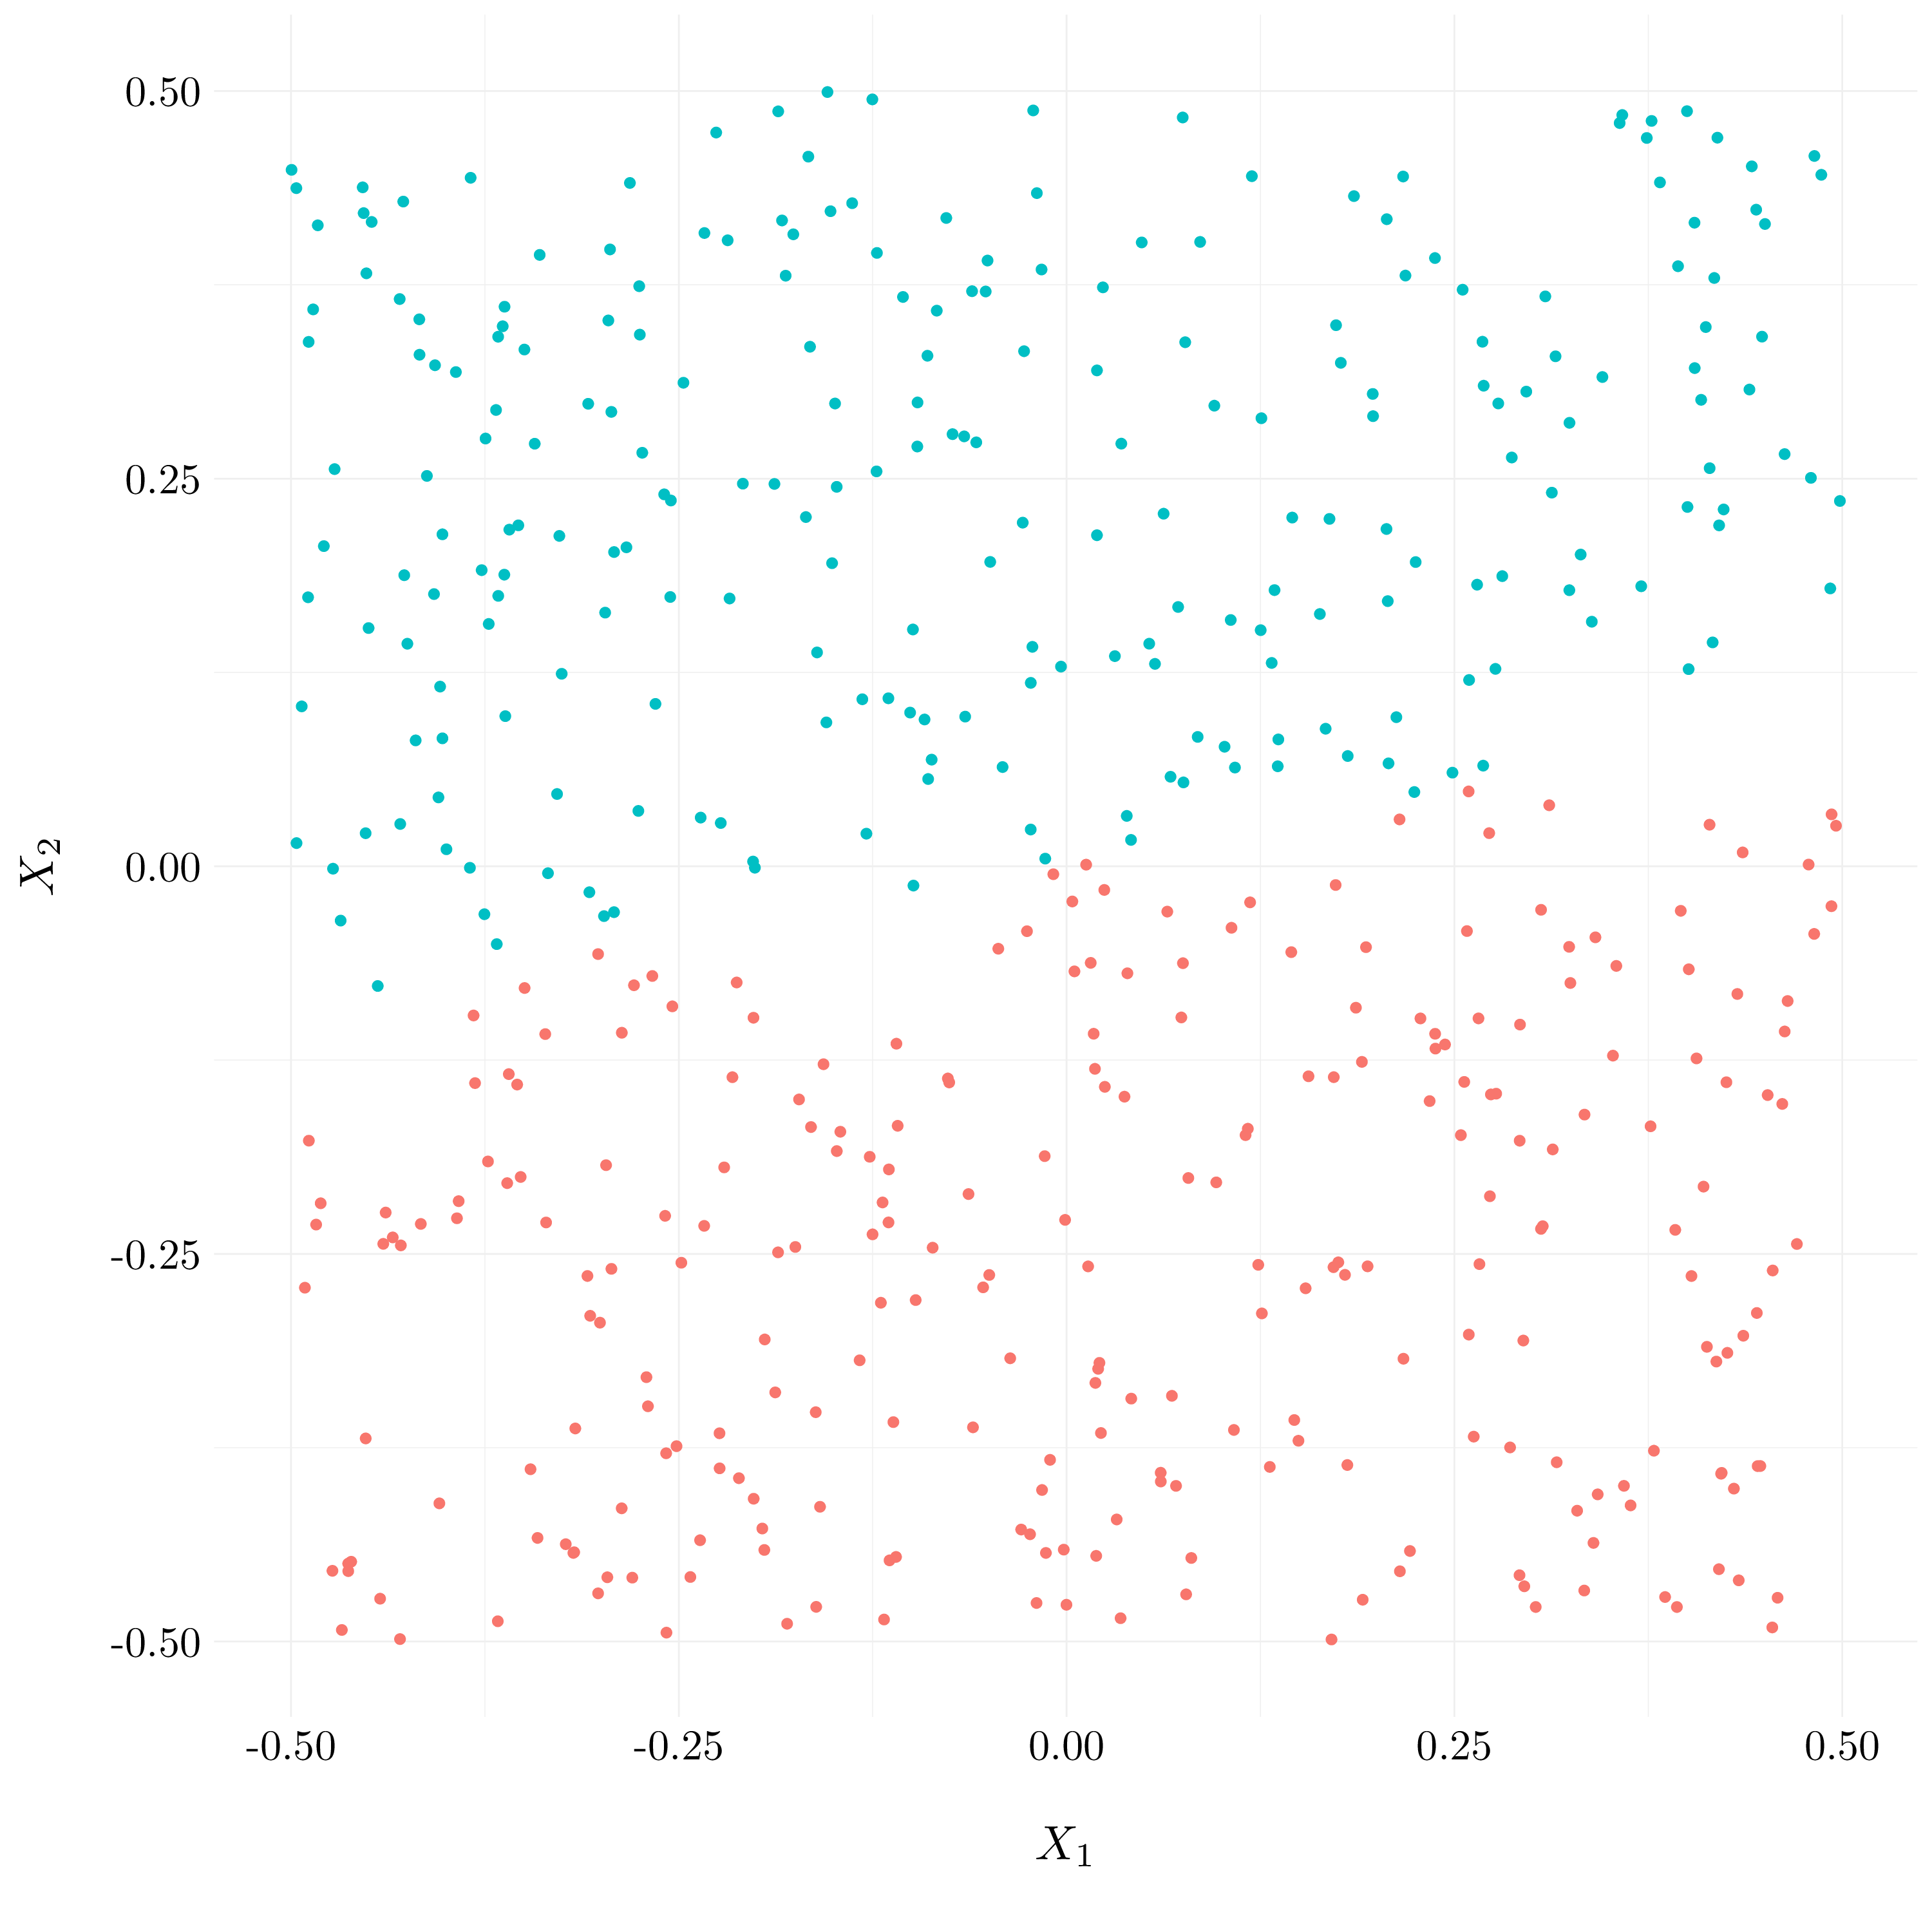 Plot of the observations with predicted classes for LM model